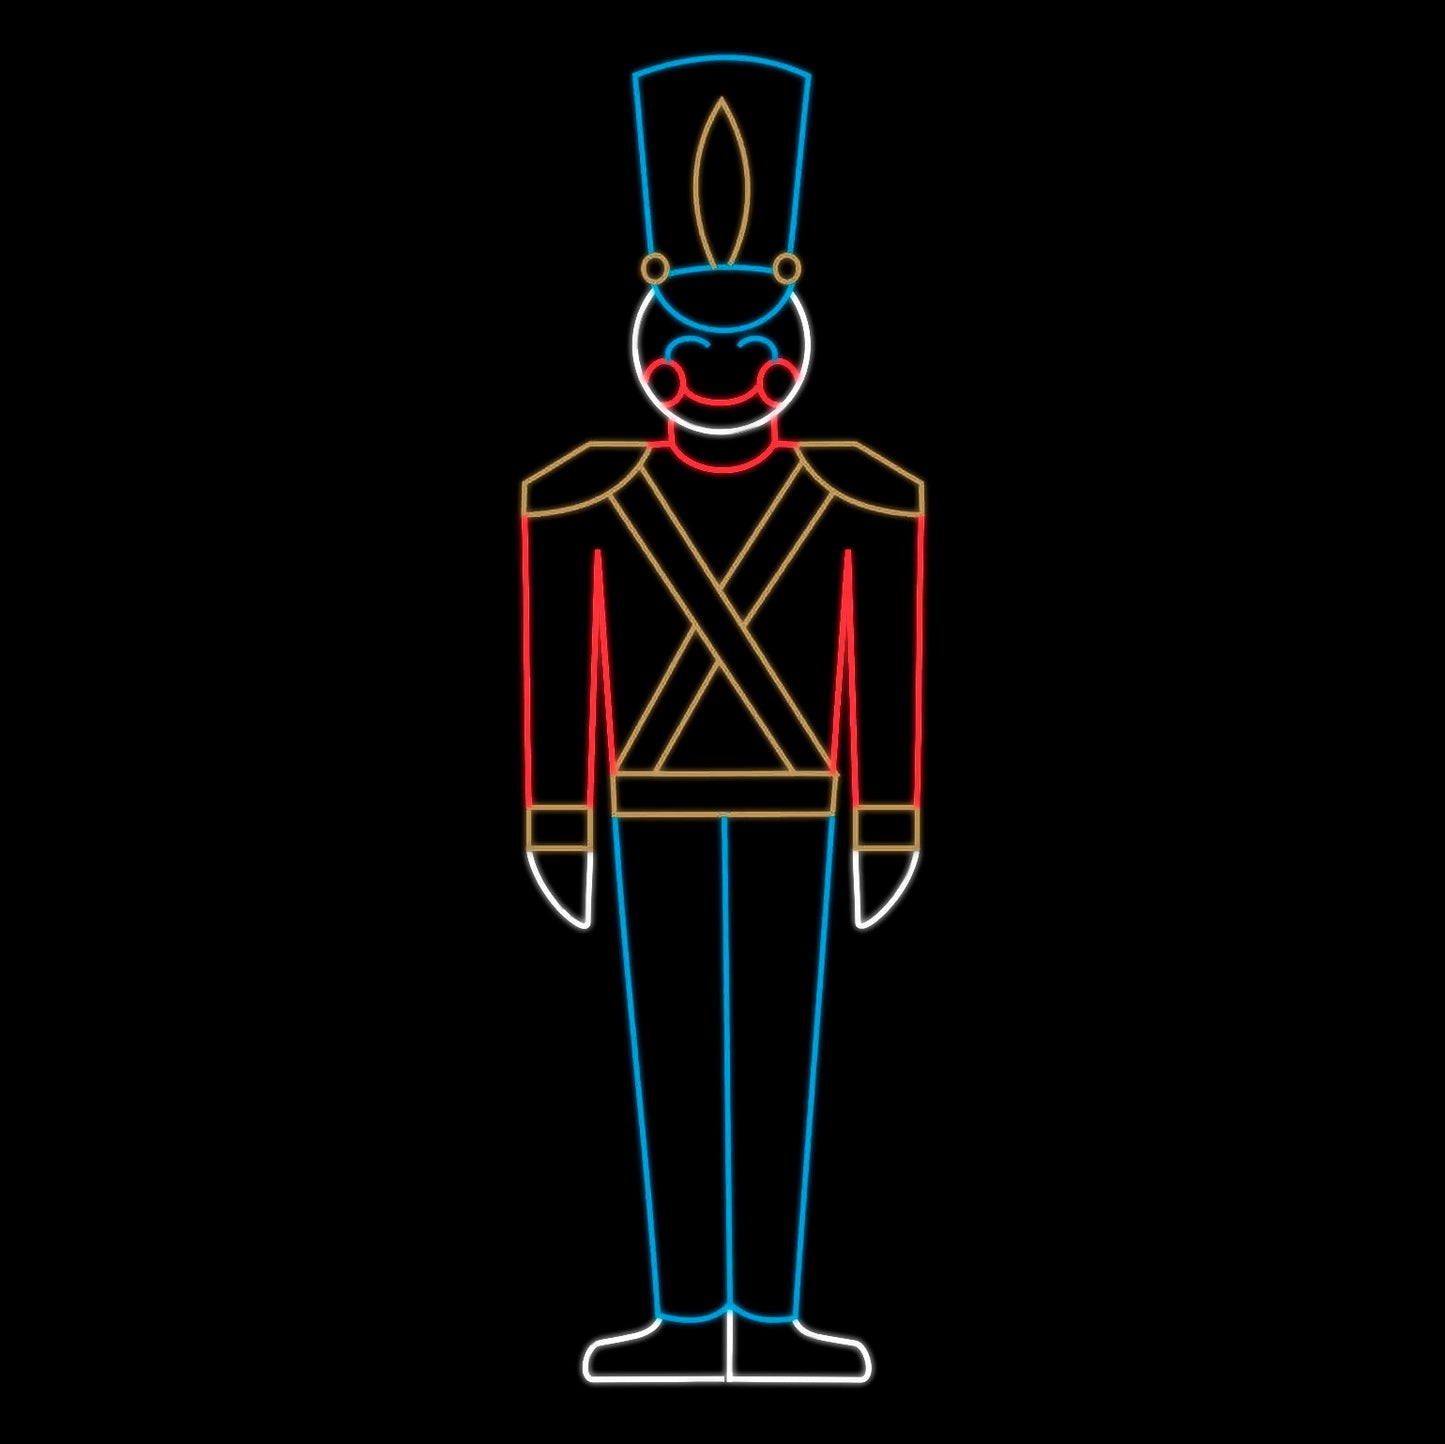 Christmas Nutcracker Toy Soldier Silhouette LED Display featuring a traditional nutcracker toy soldier. The display is illuminated with bright, red, white, yellow, and blue LED lights, creating a vibrant and festive scene against a black background. This classic and timeless display is the perfect addition to your commercial Christmas decorations.